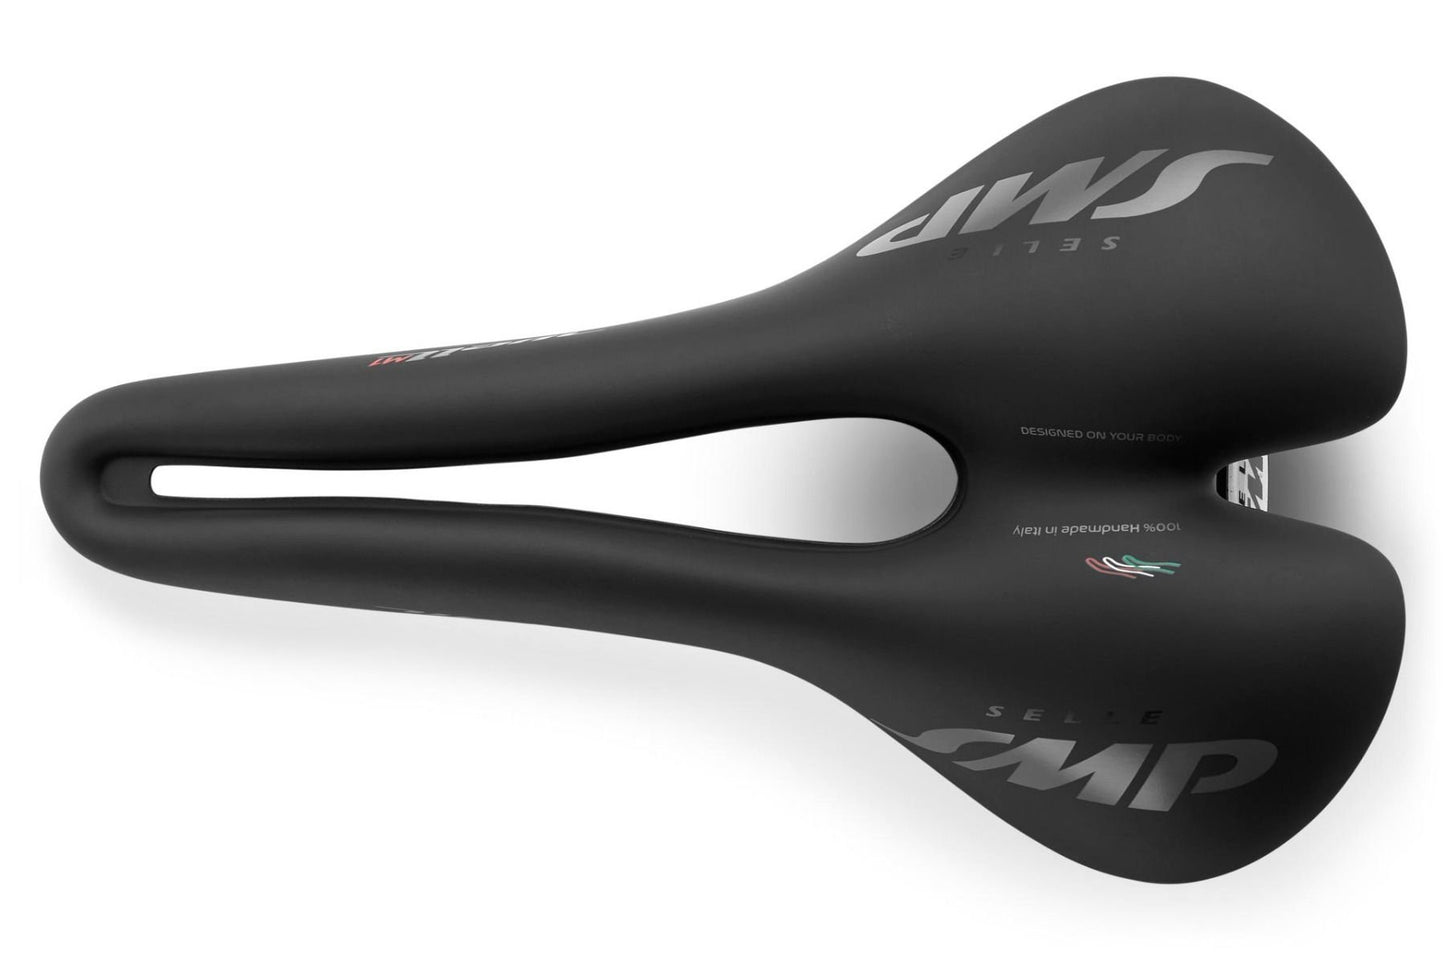 Selle SMP Well M1 Bicycle Saddle